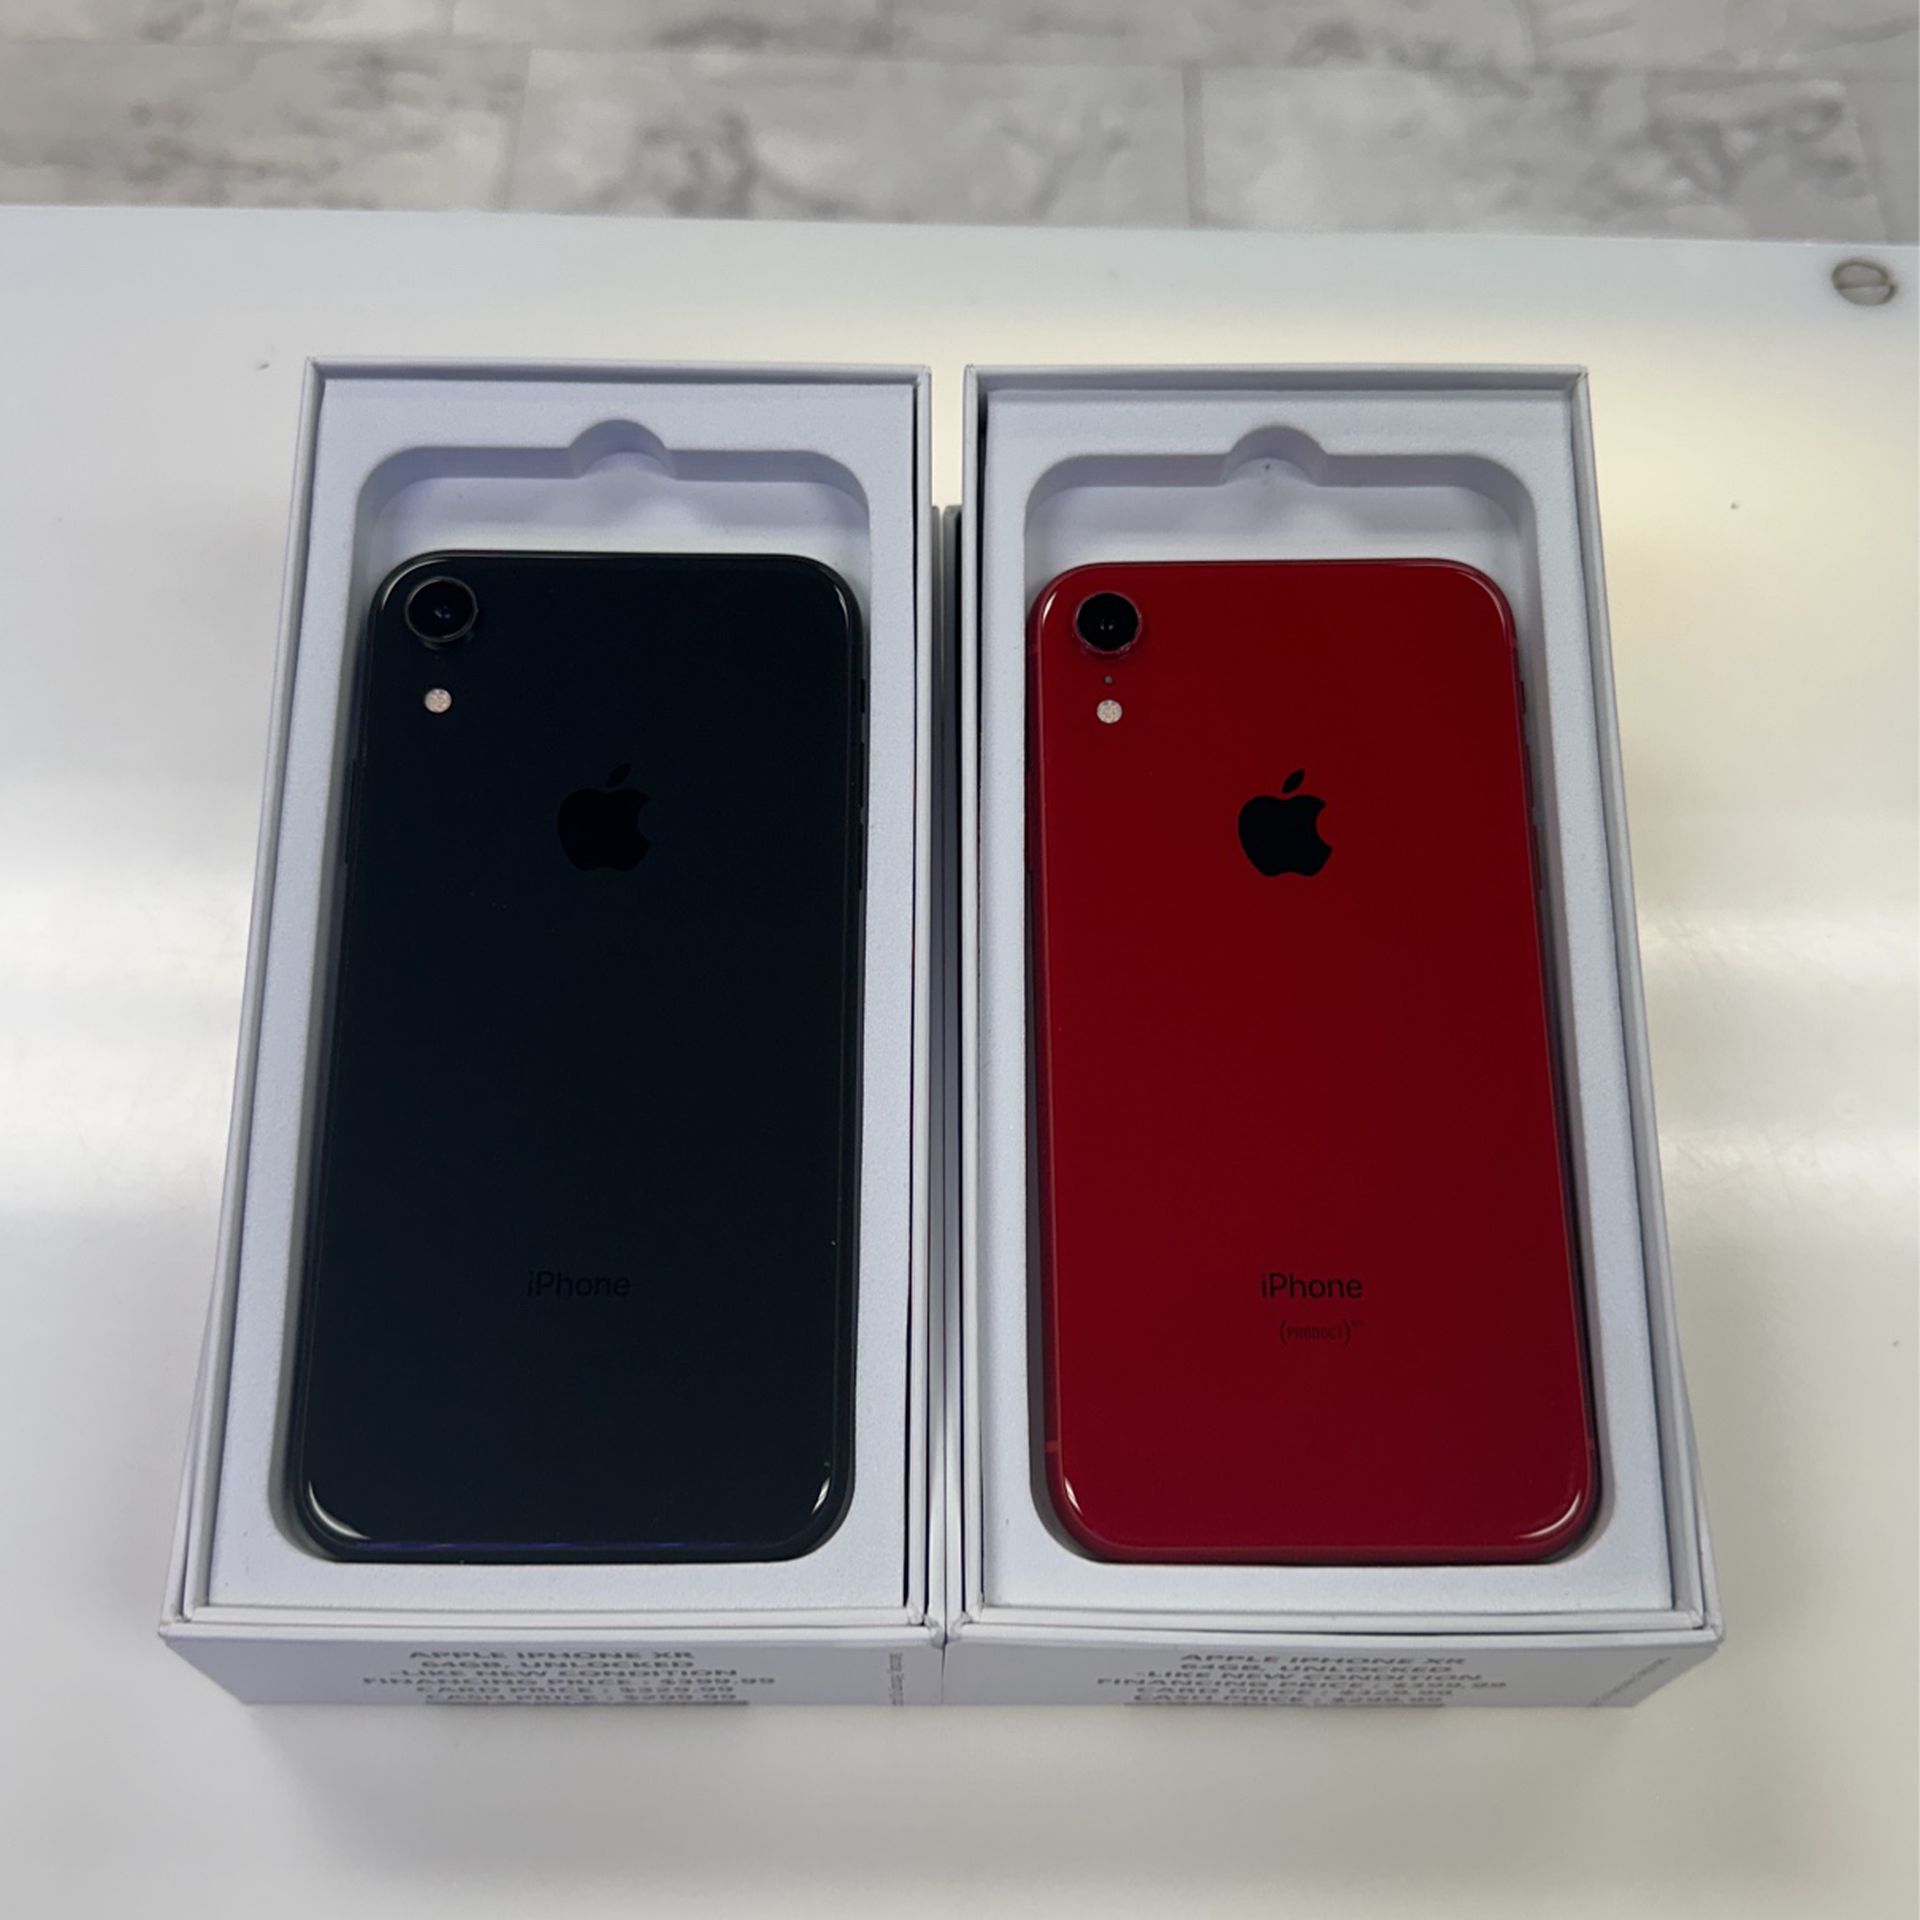 Apple-iPhone XR ,64GB Unlocked, Like New Condition 